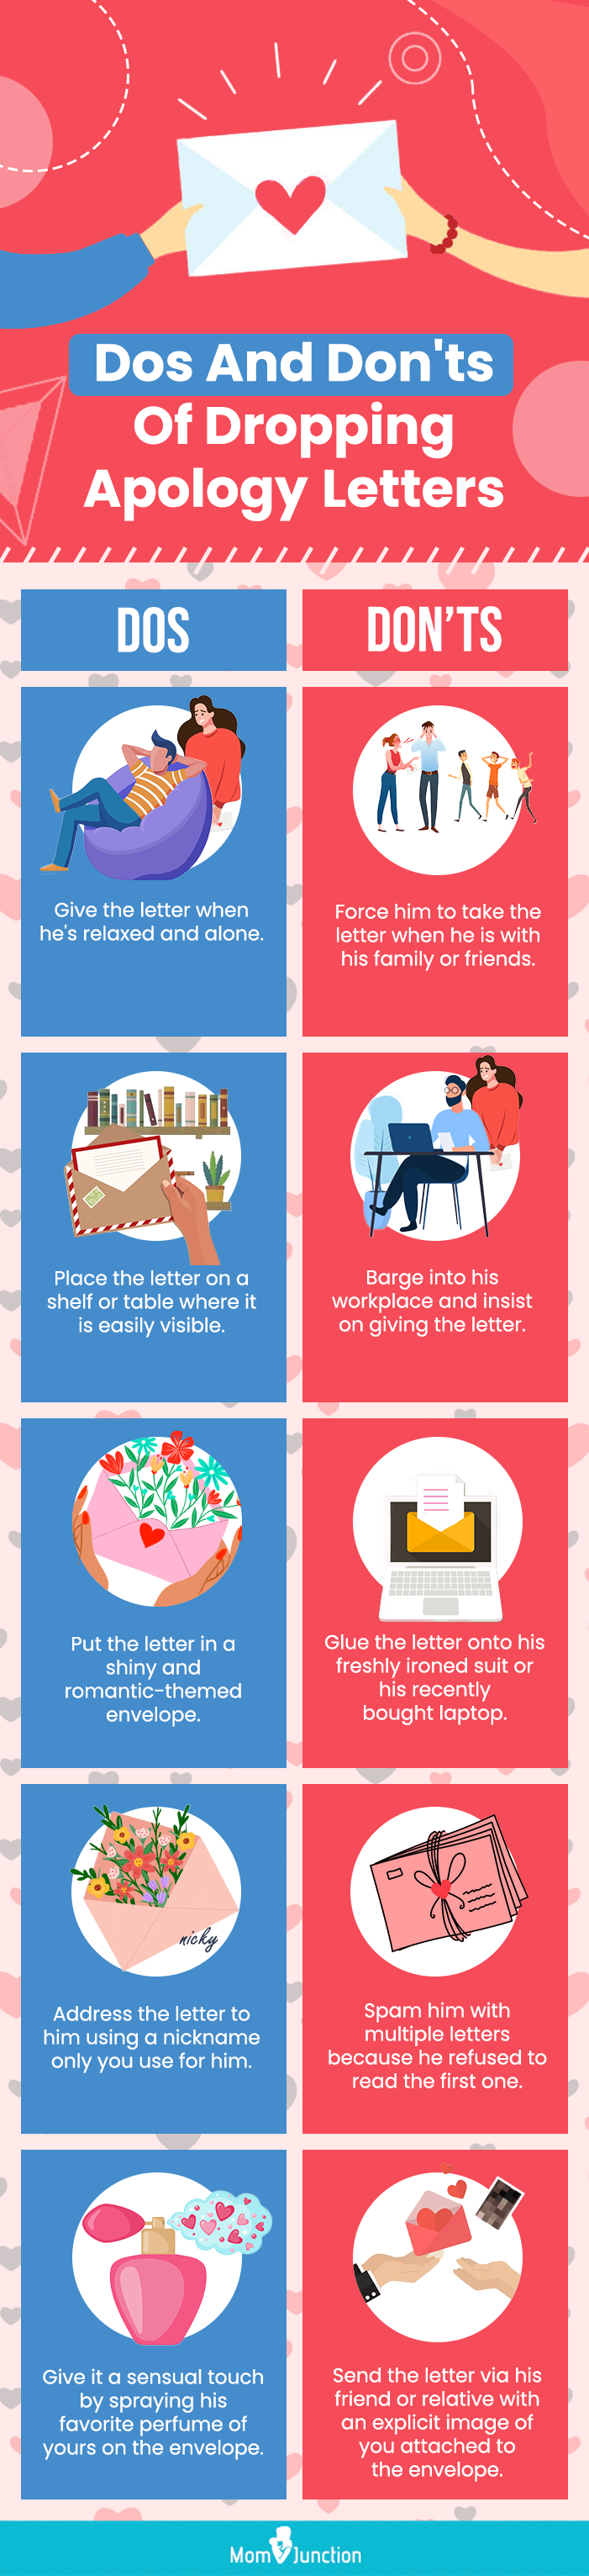 do and donts of dropping a letter (infographic)